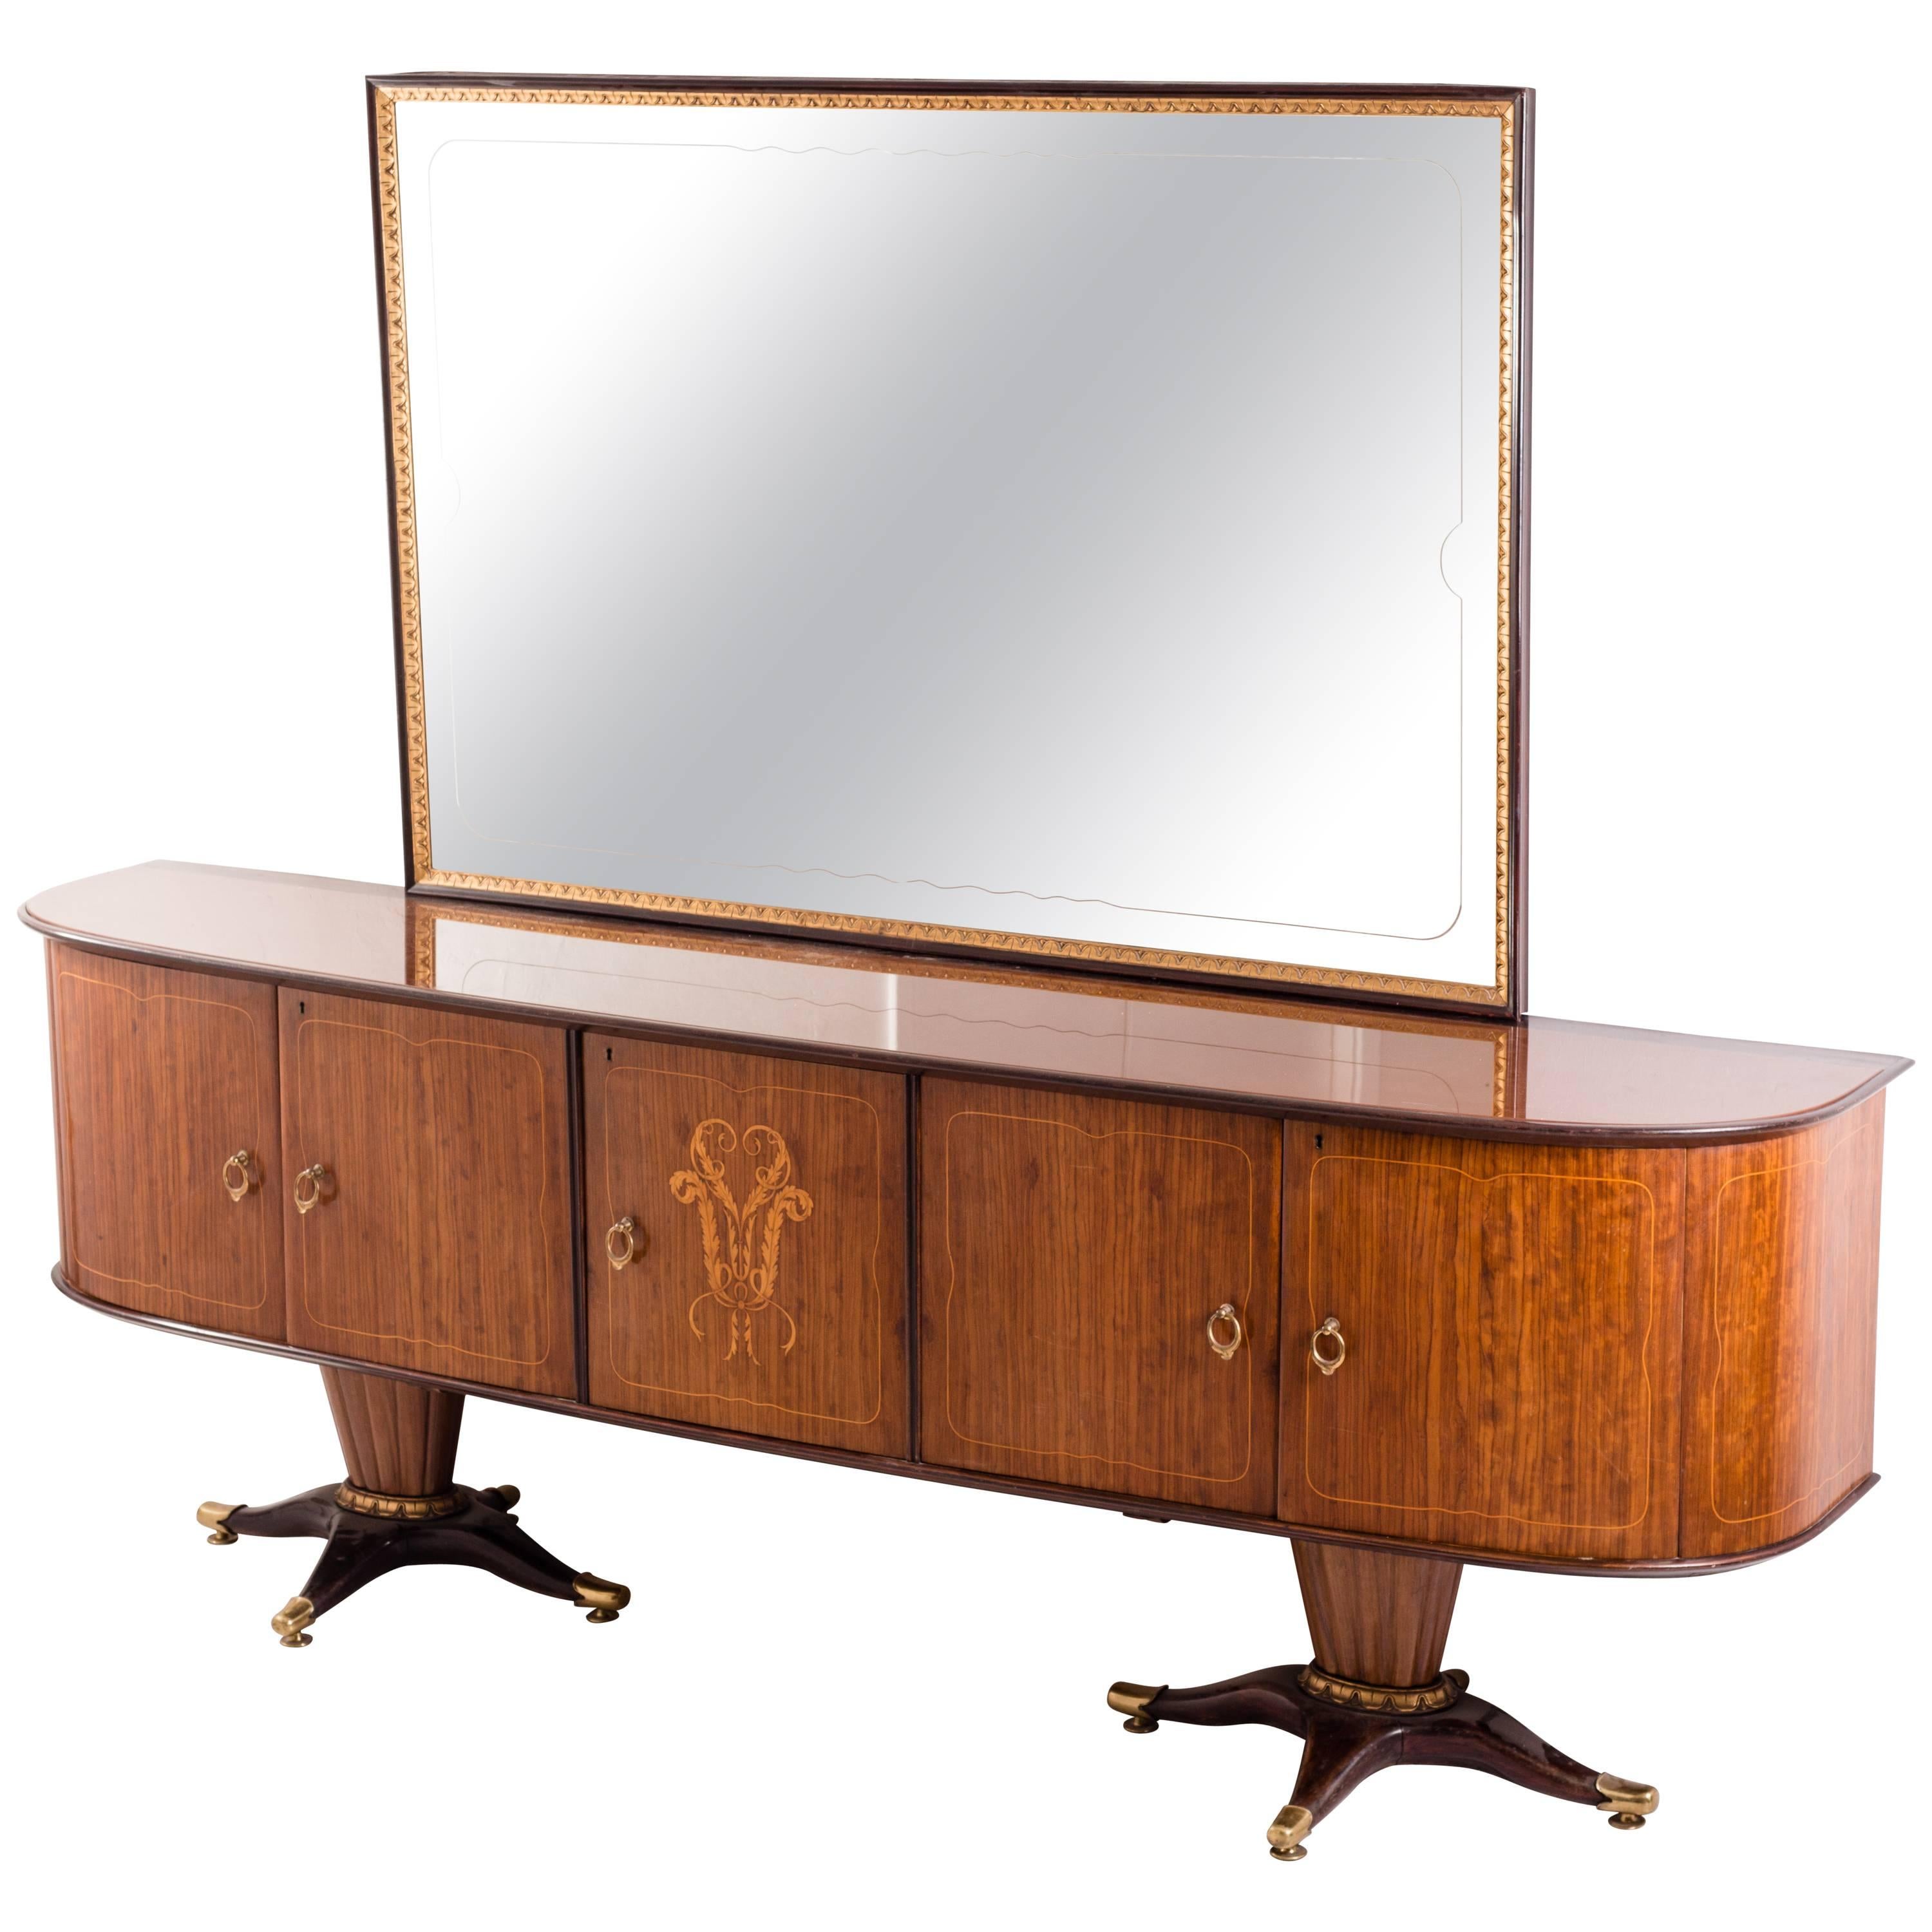 Italian Midcentury Sideboard with Mirror by Paolo Buffa, 1950s